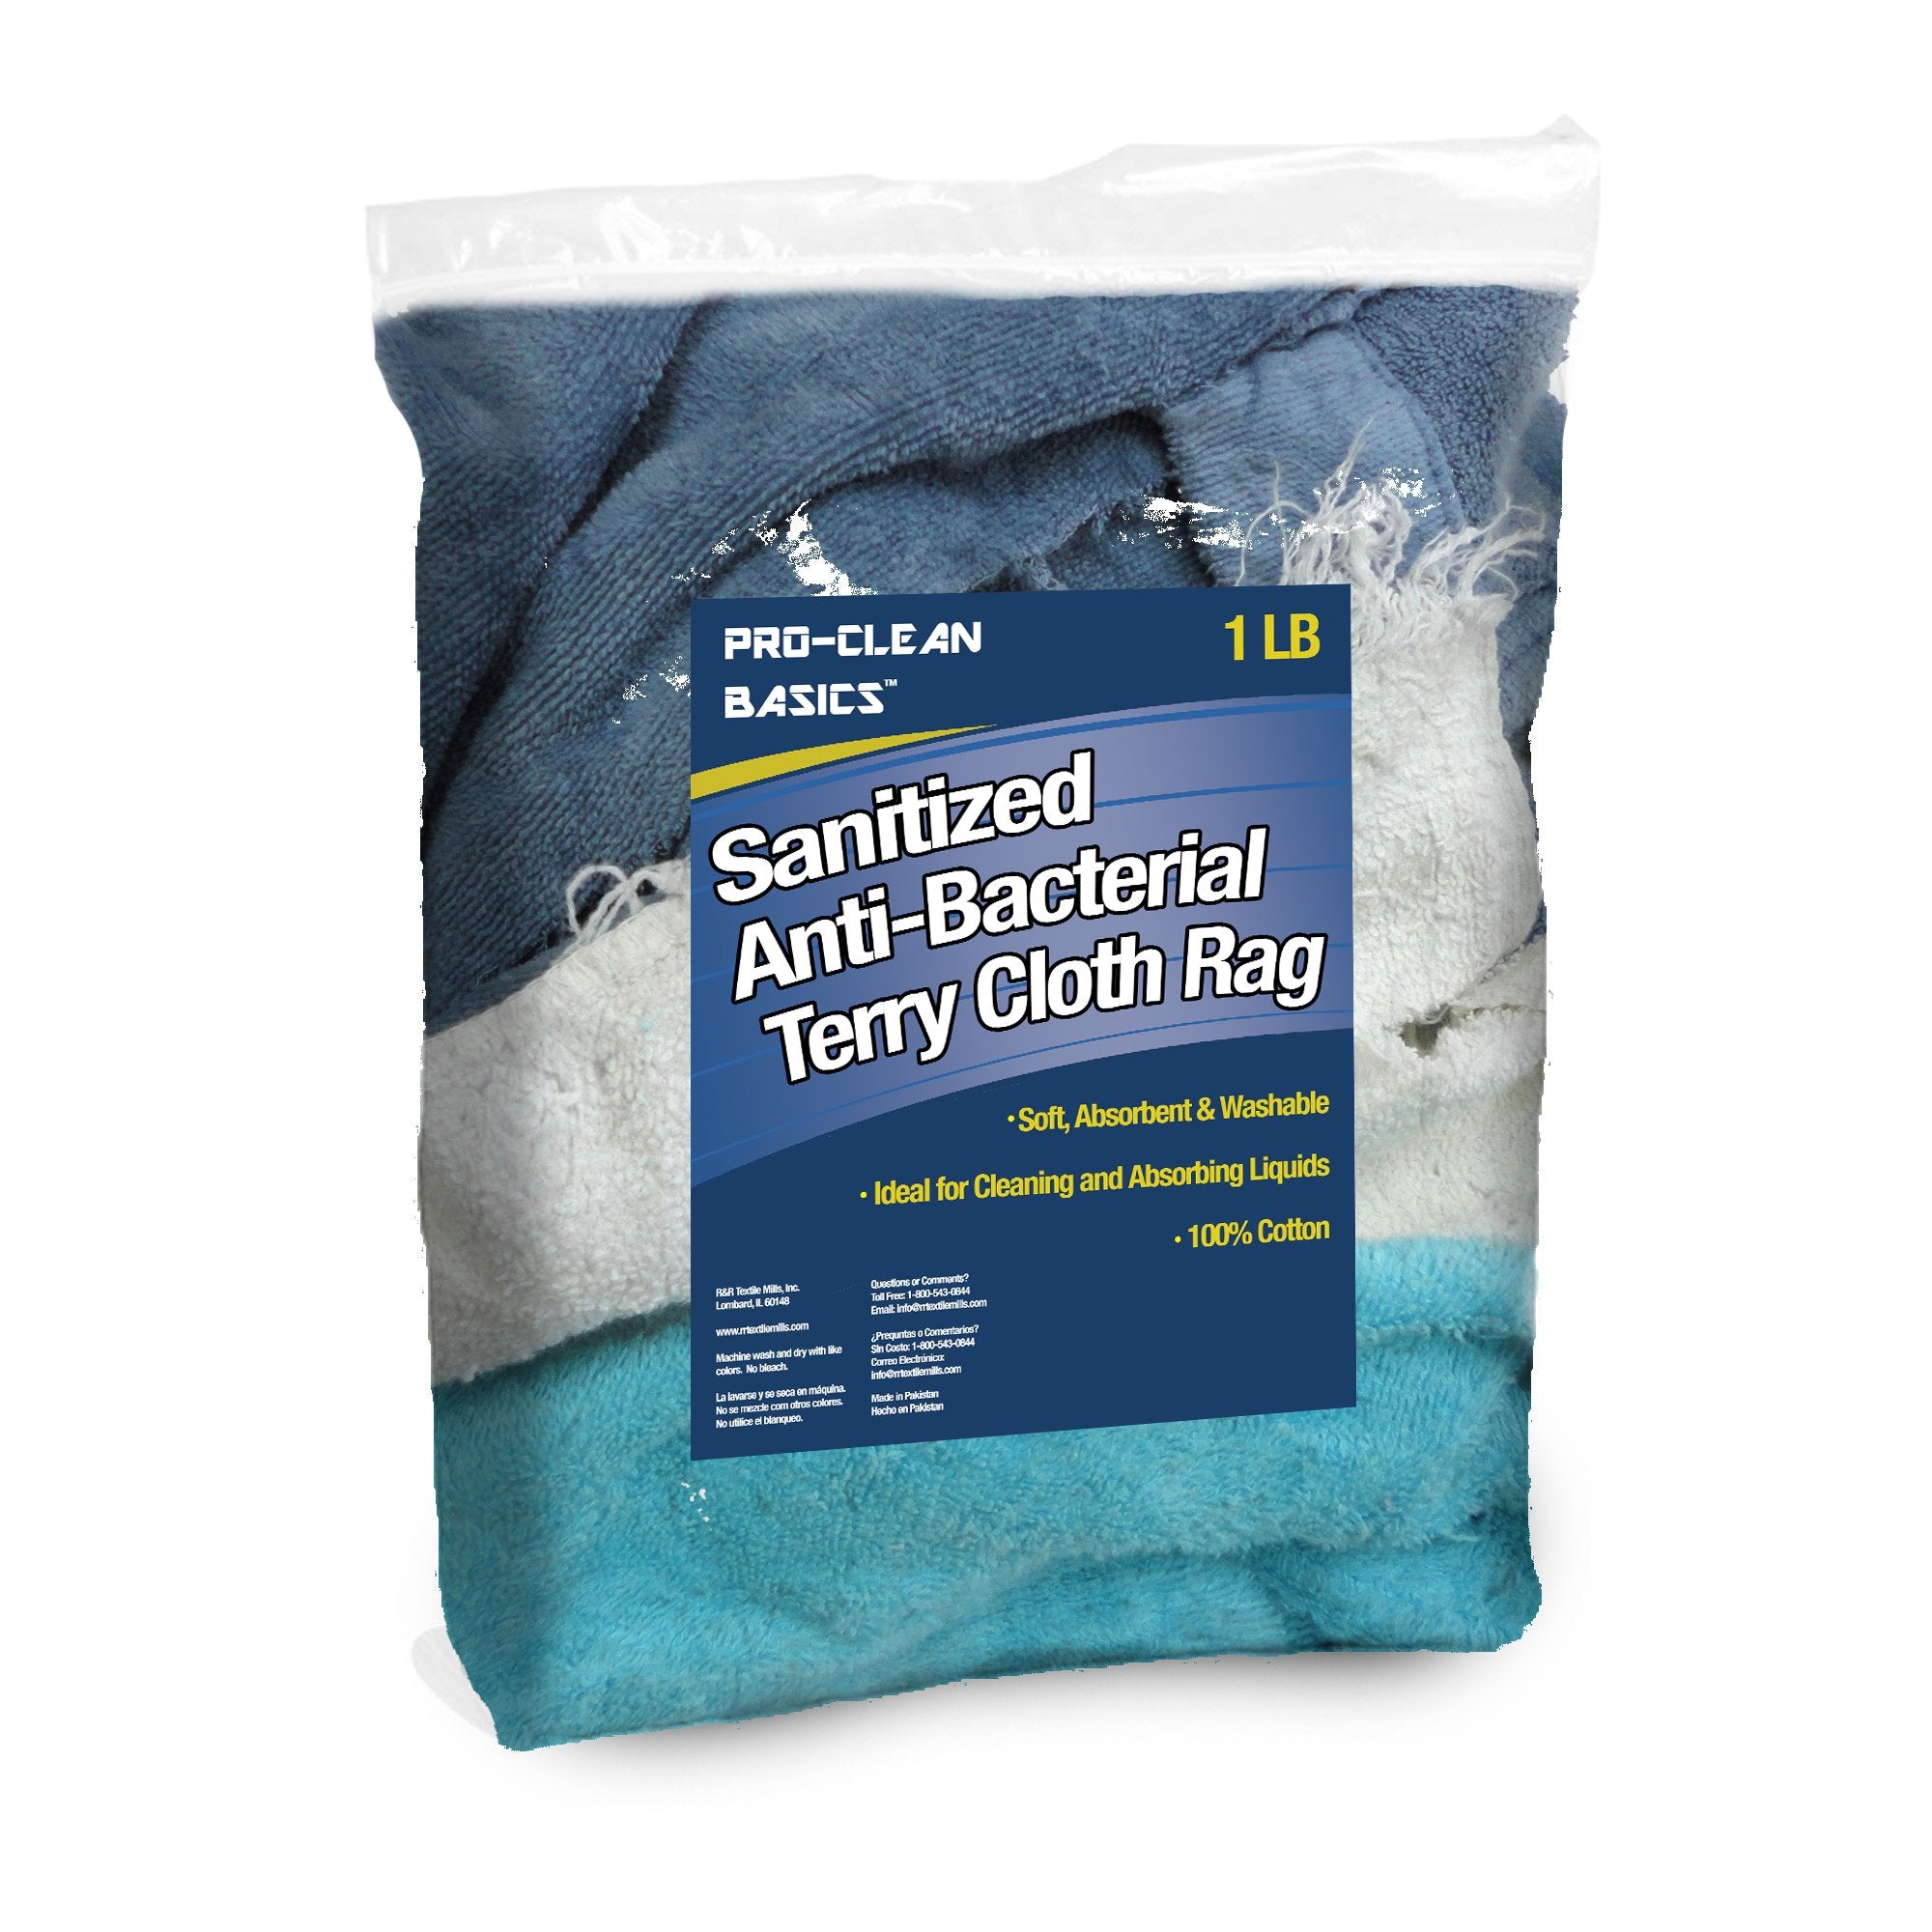 Pro-Clean Basics:  Sanitized Anti-Bacterial Terry Cloth Rags - Colored